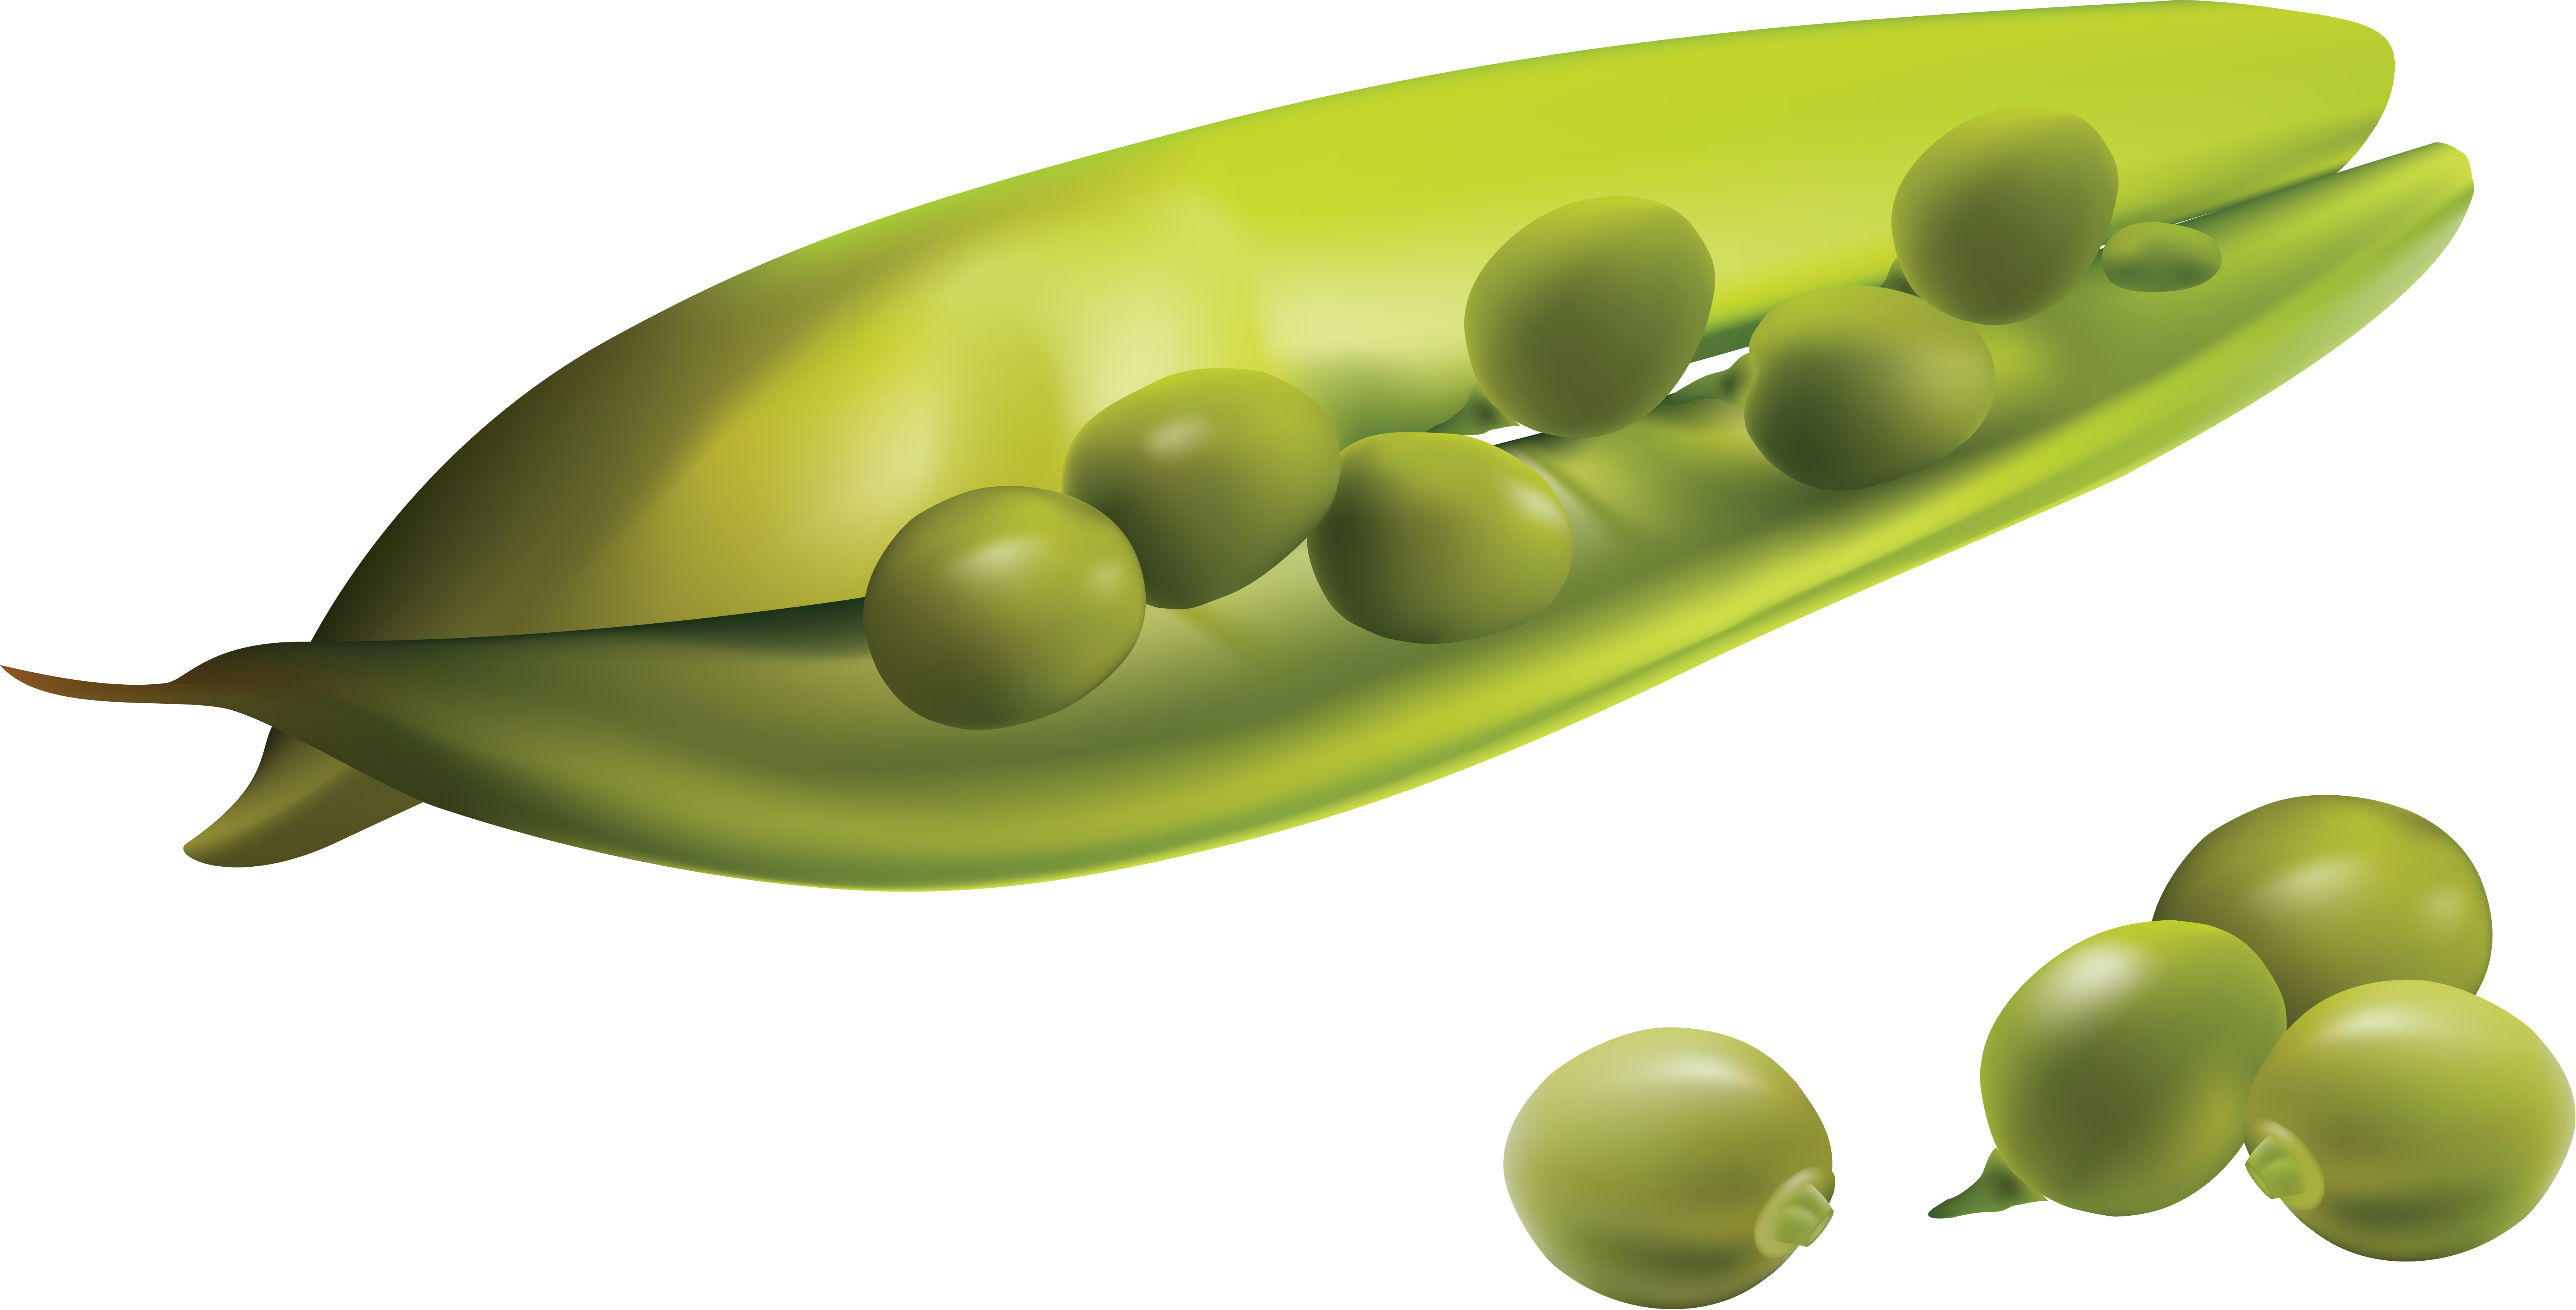 Peas Background PNG Image